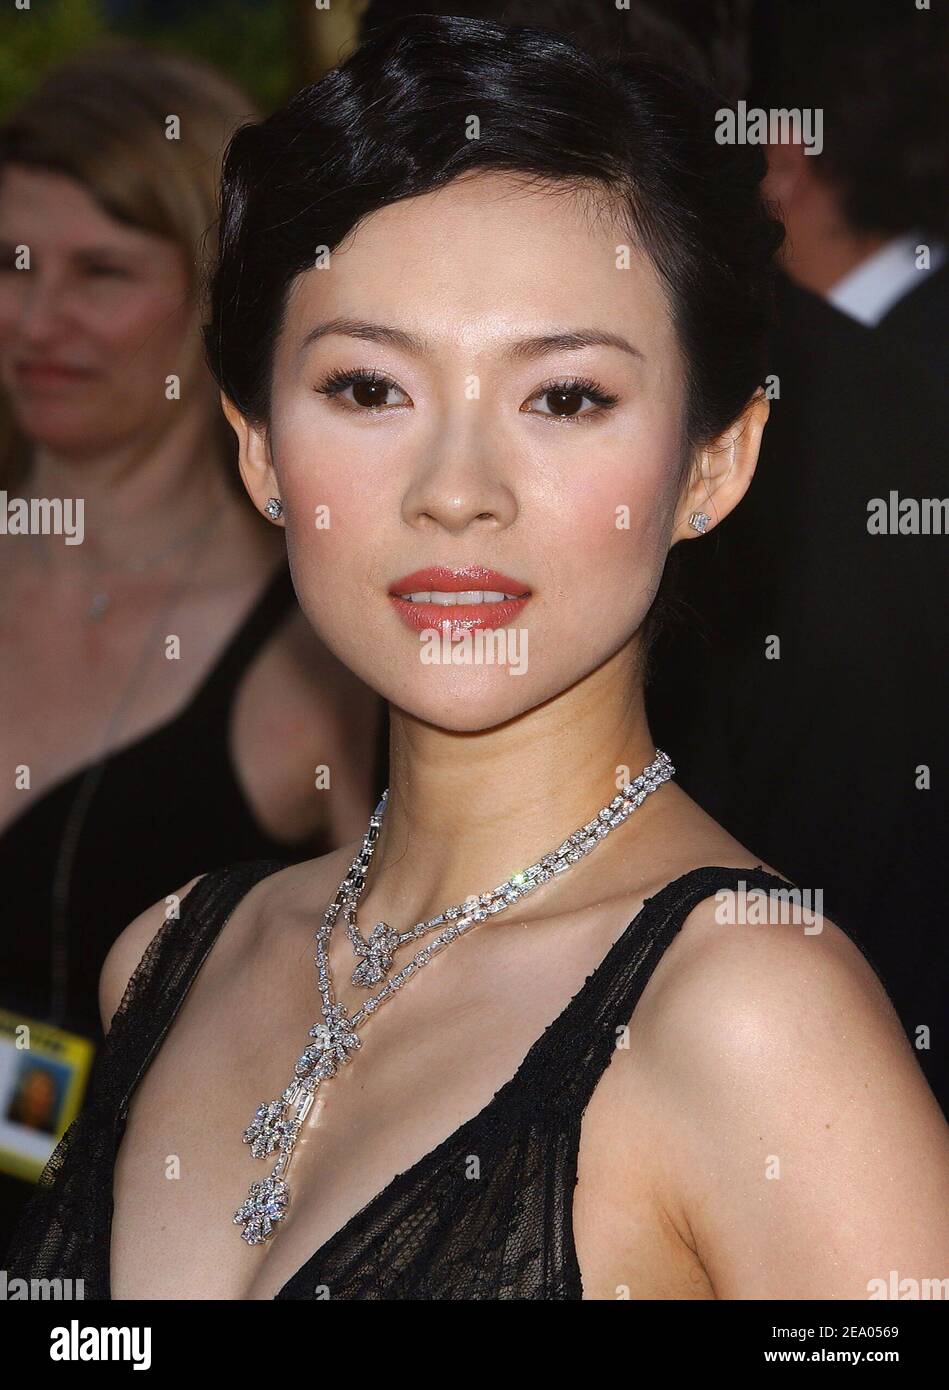 Ziyi Zhang arrives at the 77th Annual Academy Awards held at the Kodak Theater in Hollywood, CA on February 27, 2005. Photo by Hahn-Khayat-Nebinger/ABACA Stock Photo